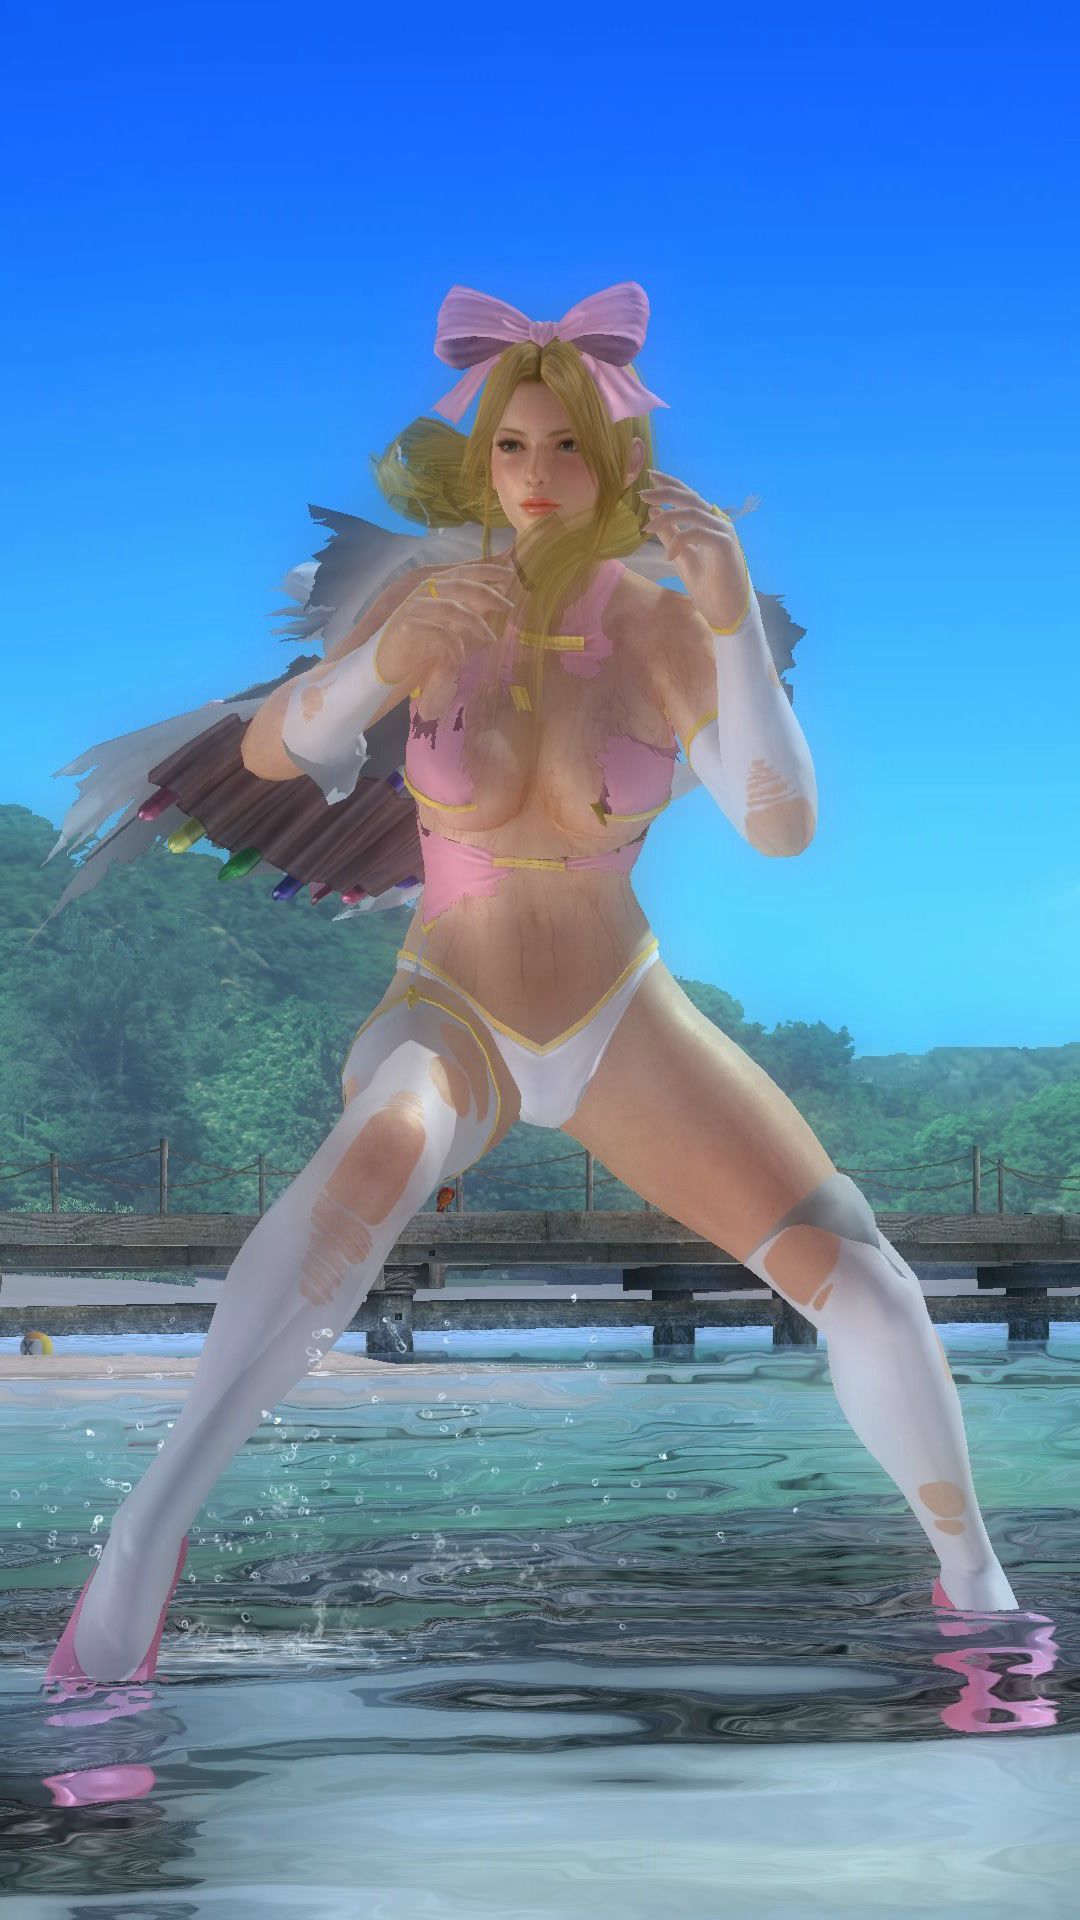 [Image] the female characters appearing in the game somehow why whole erotic or doing body with wwwwww 4